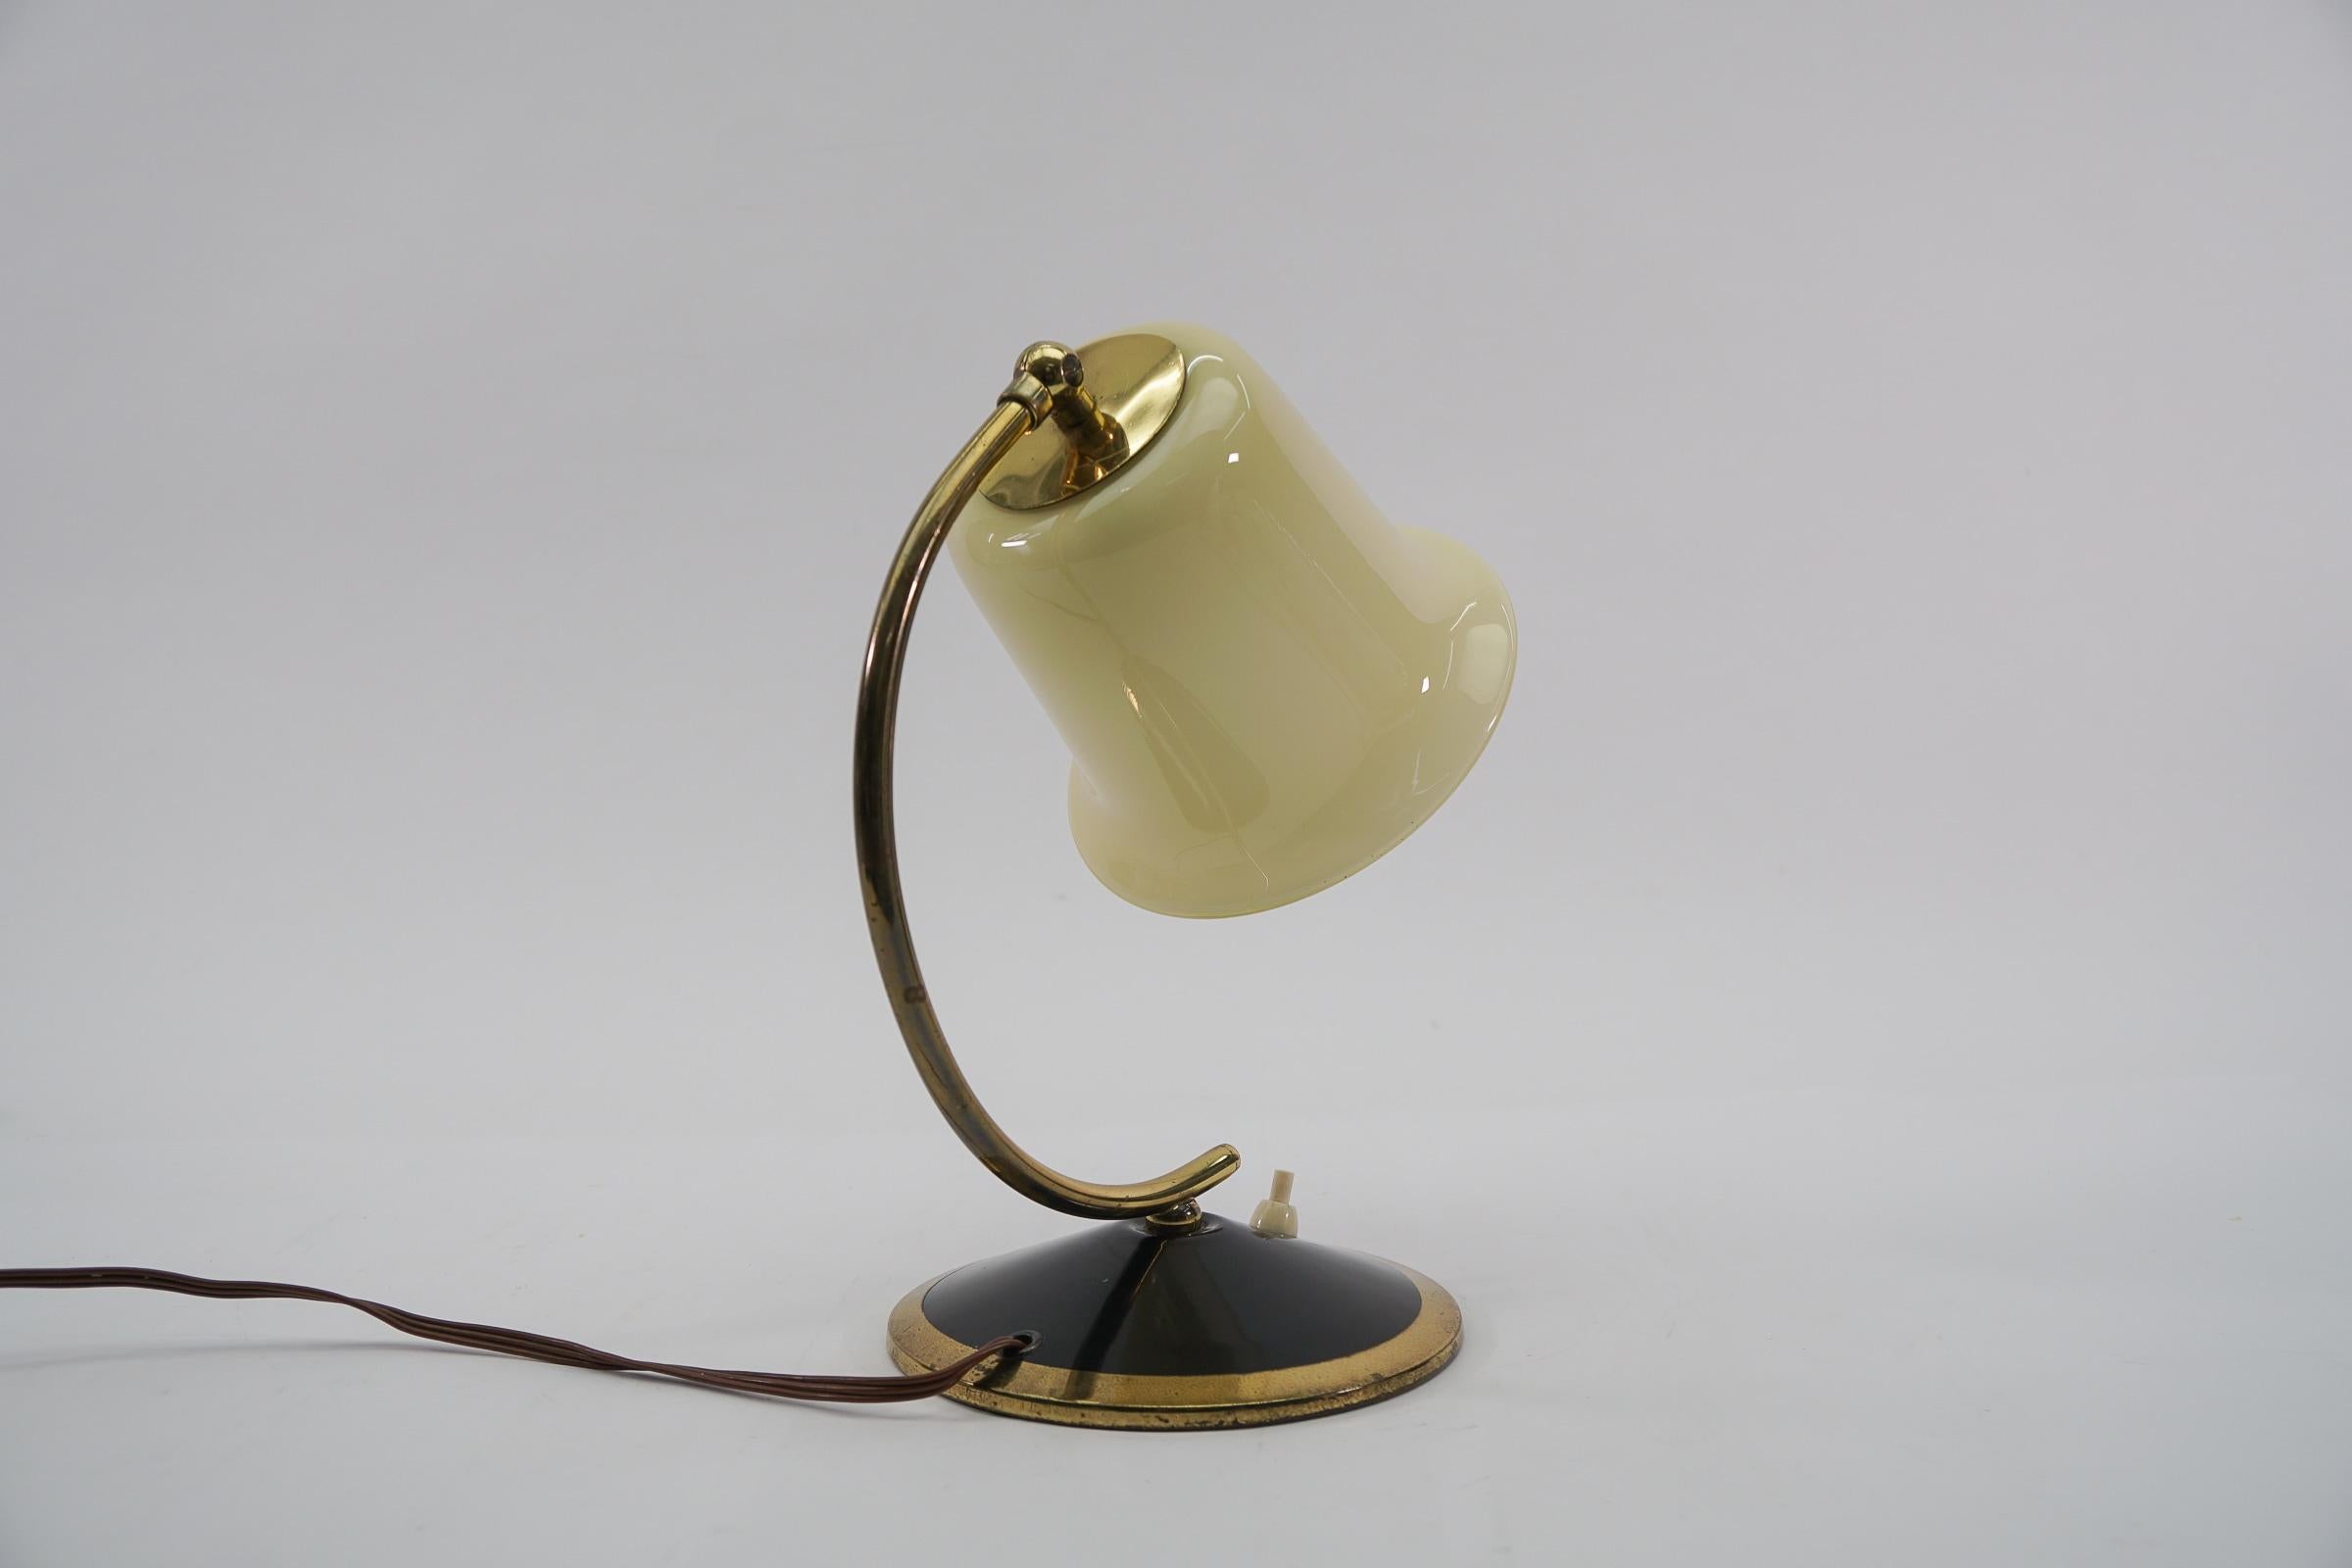 Austrian Lovely Midcentury Table Lampe Made in Glass and Brass, 1950s, Austria For Sale